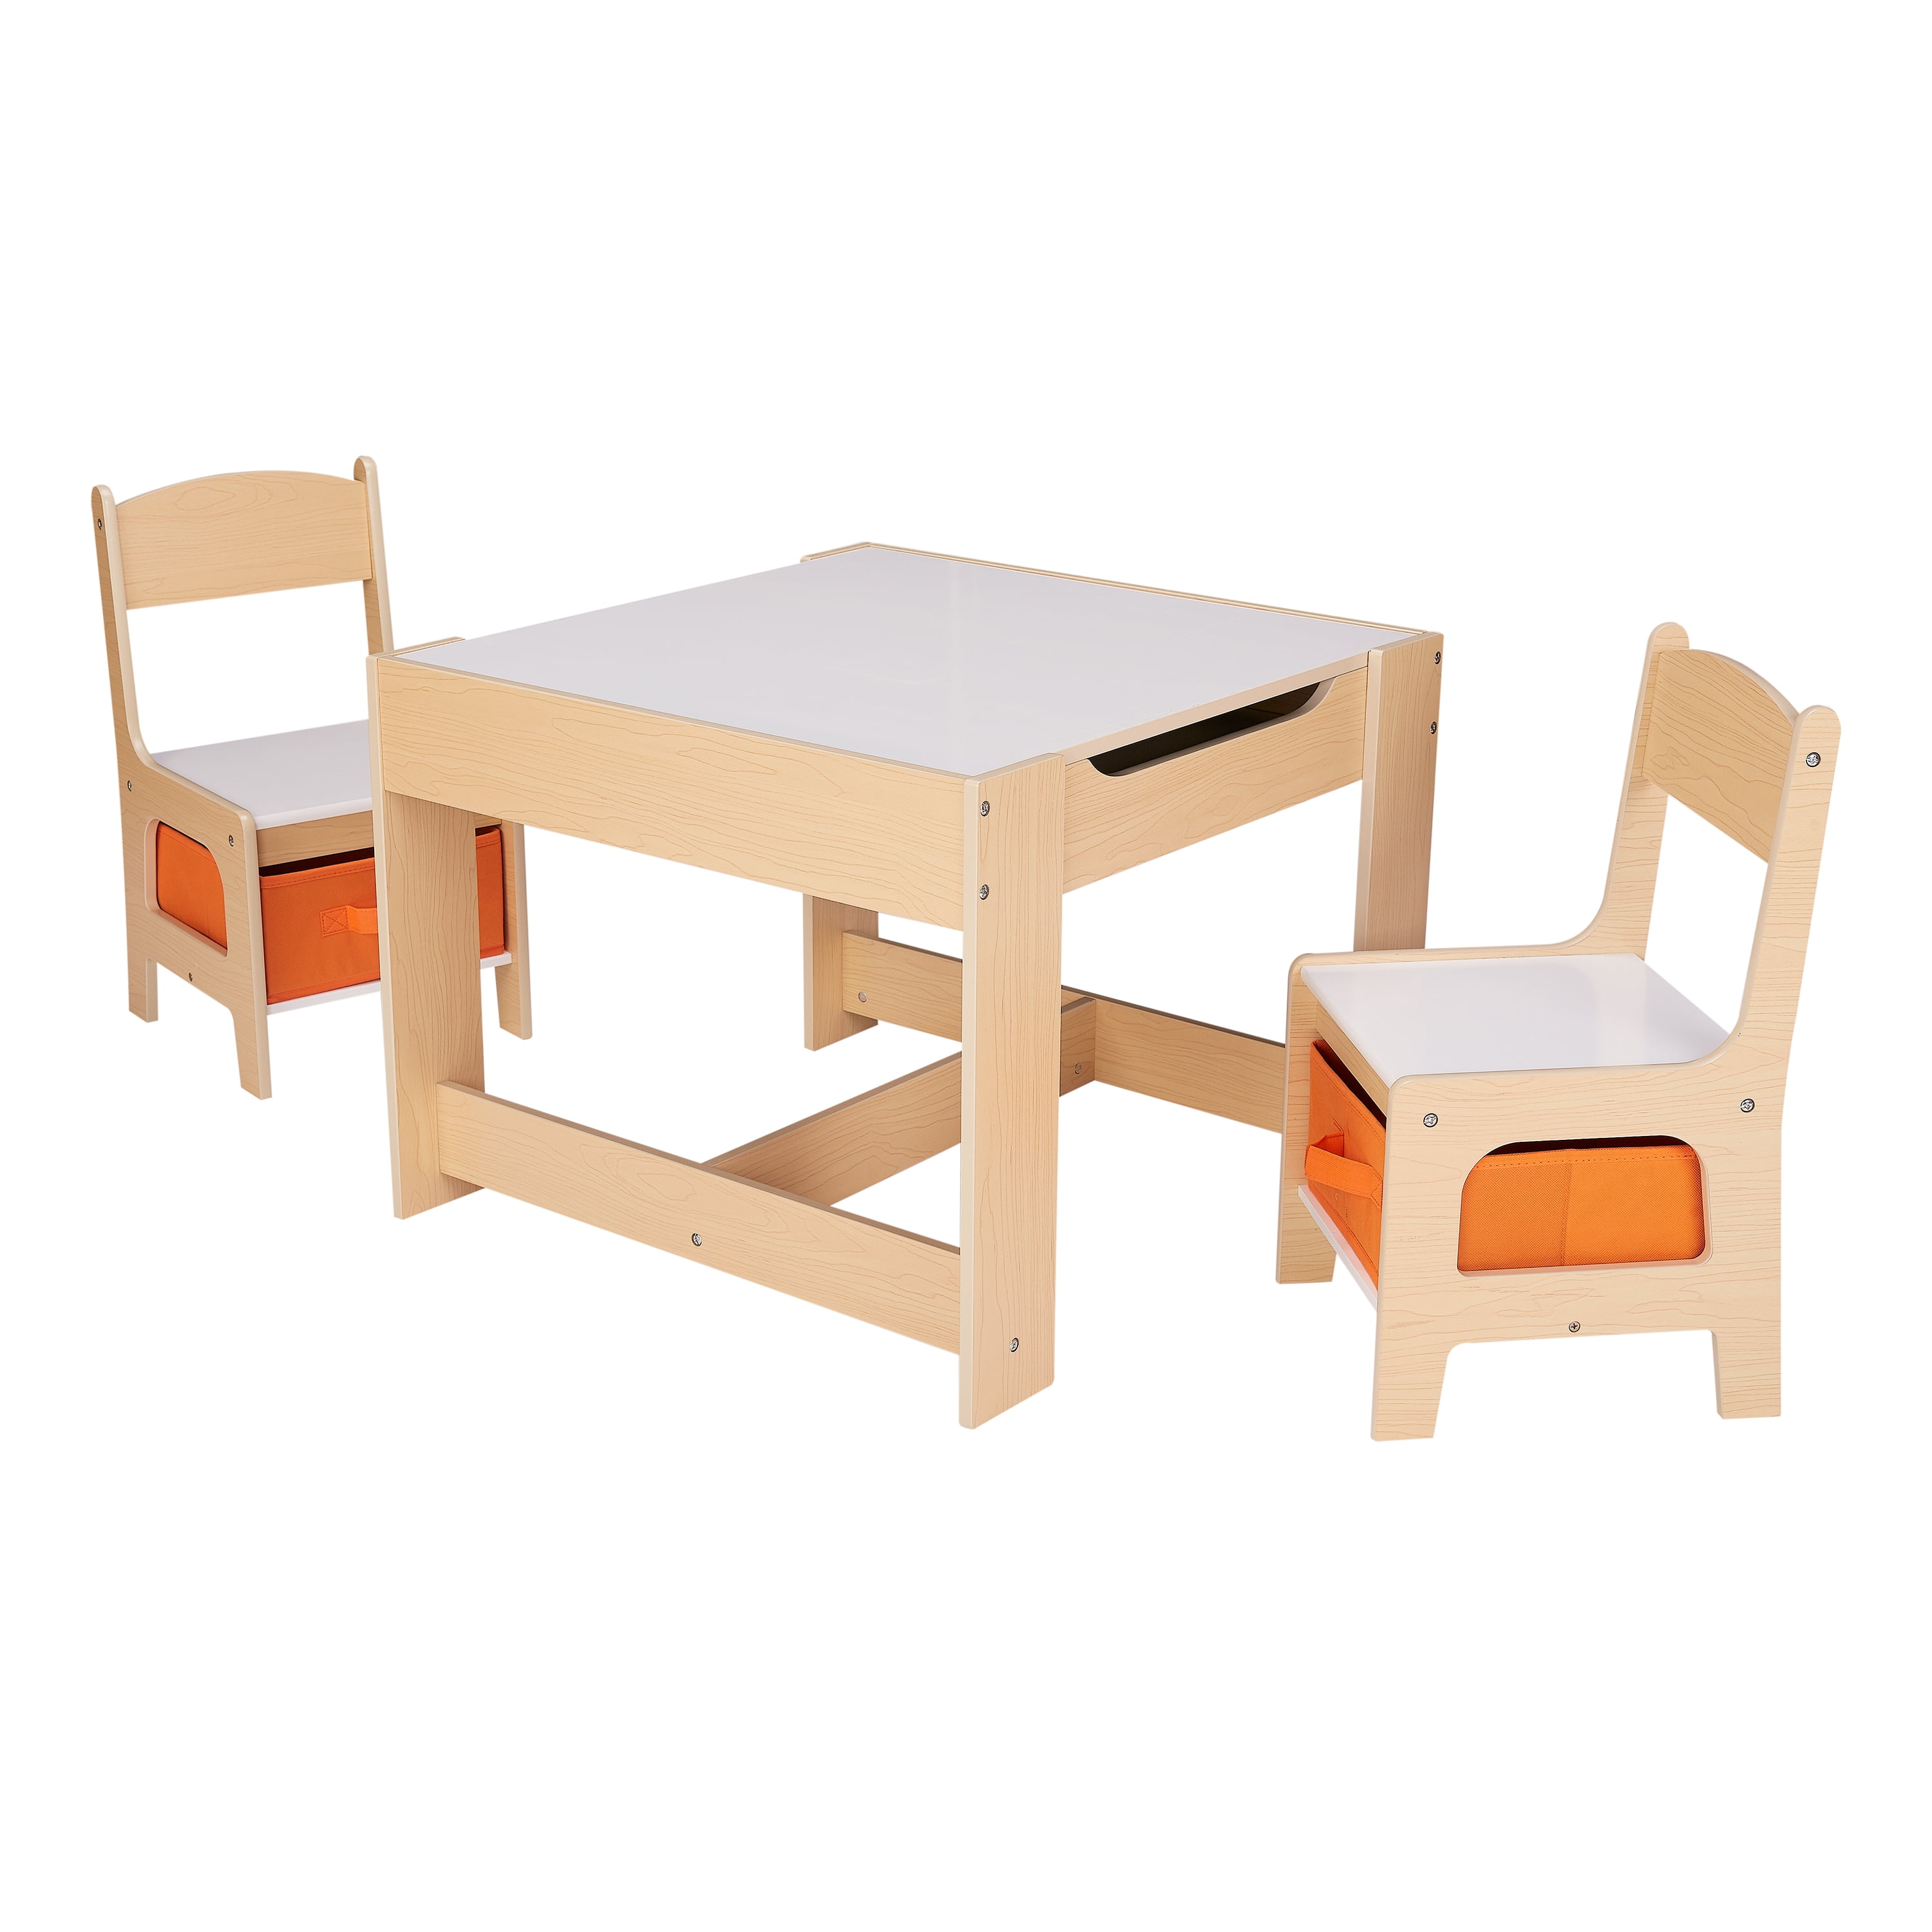 Childrens Wooden Table And Chair Set Hotsell, 18 OFF   www ...